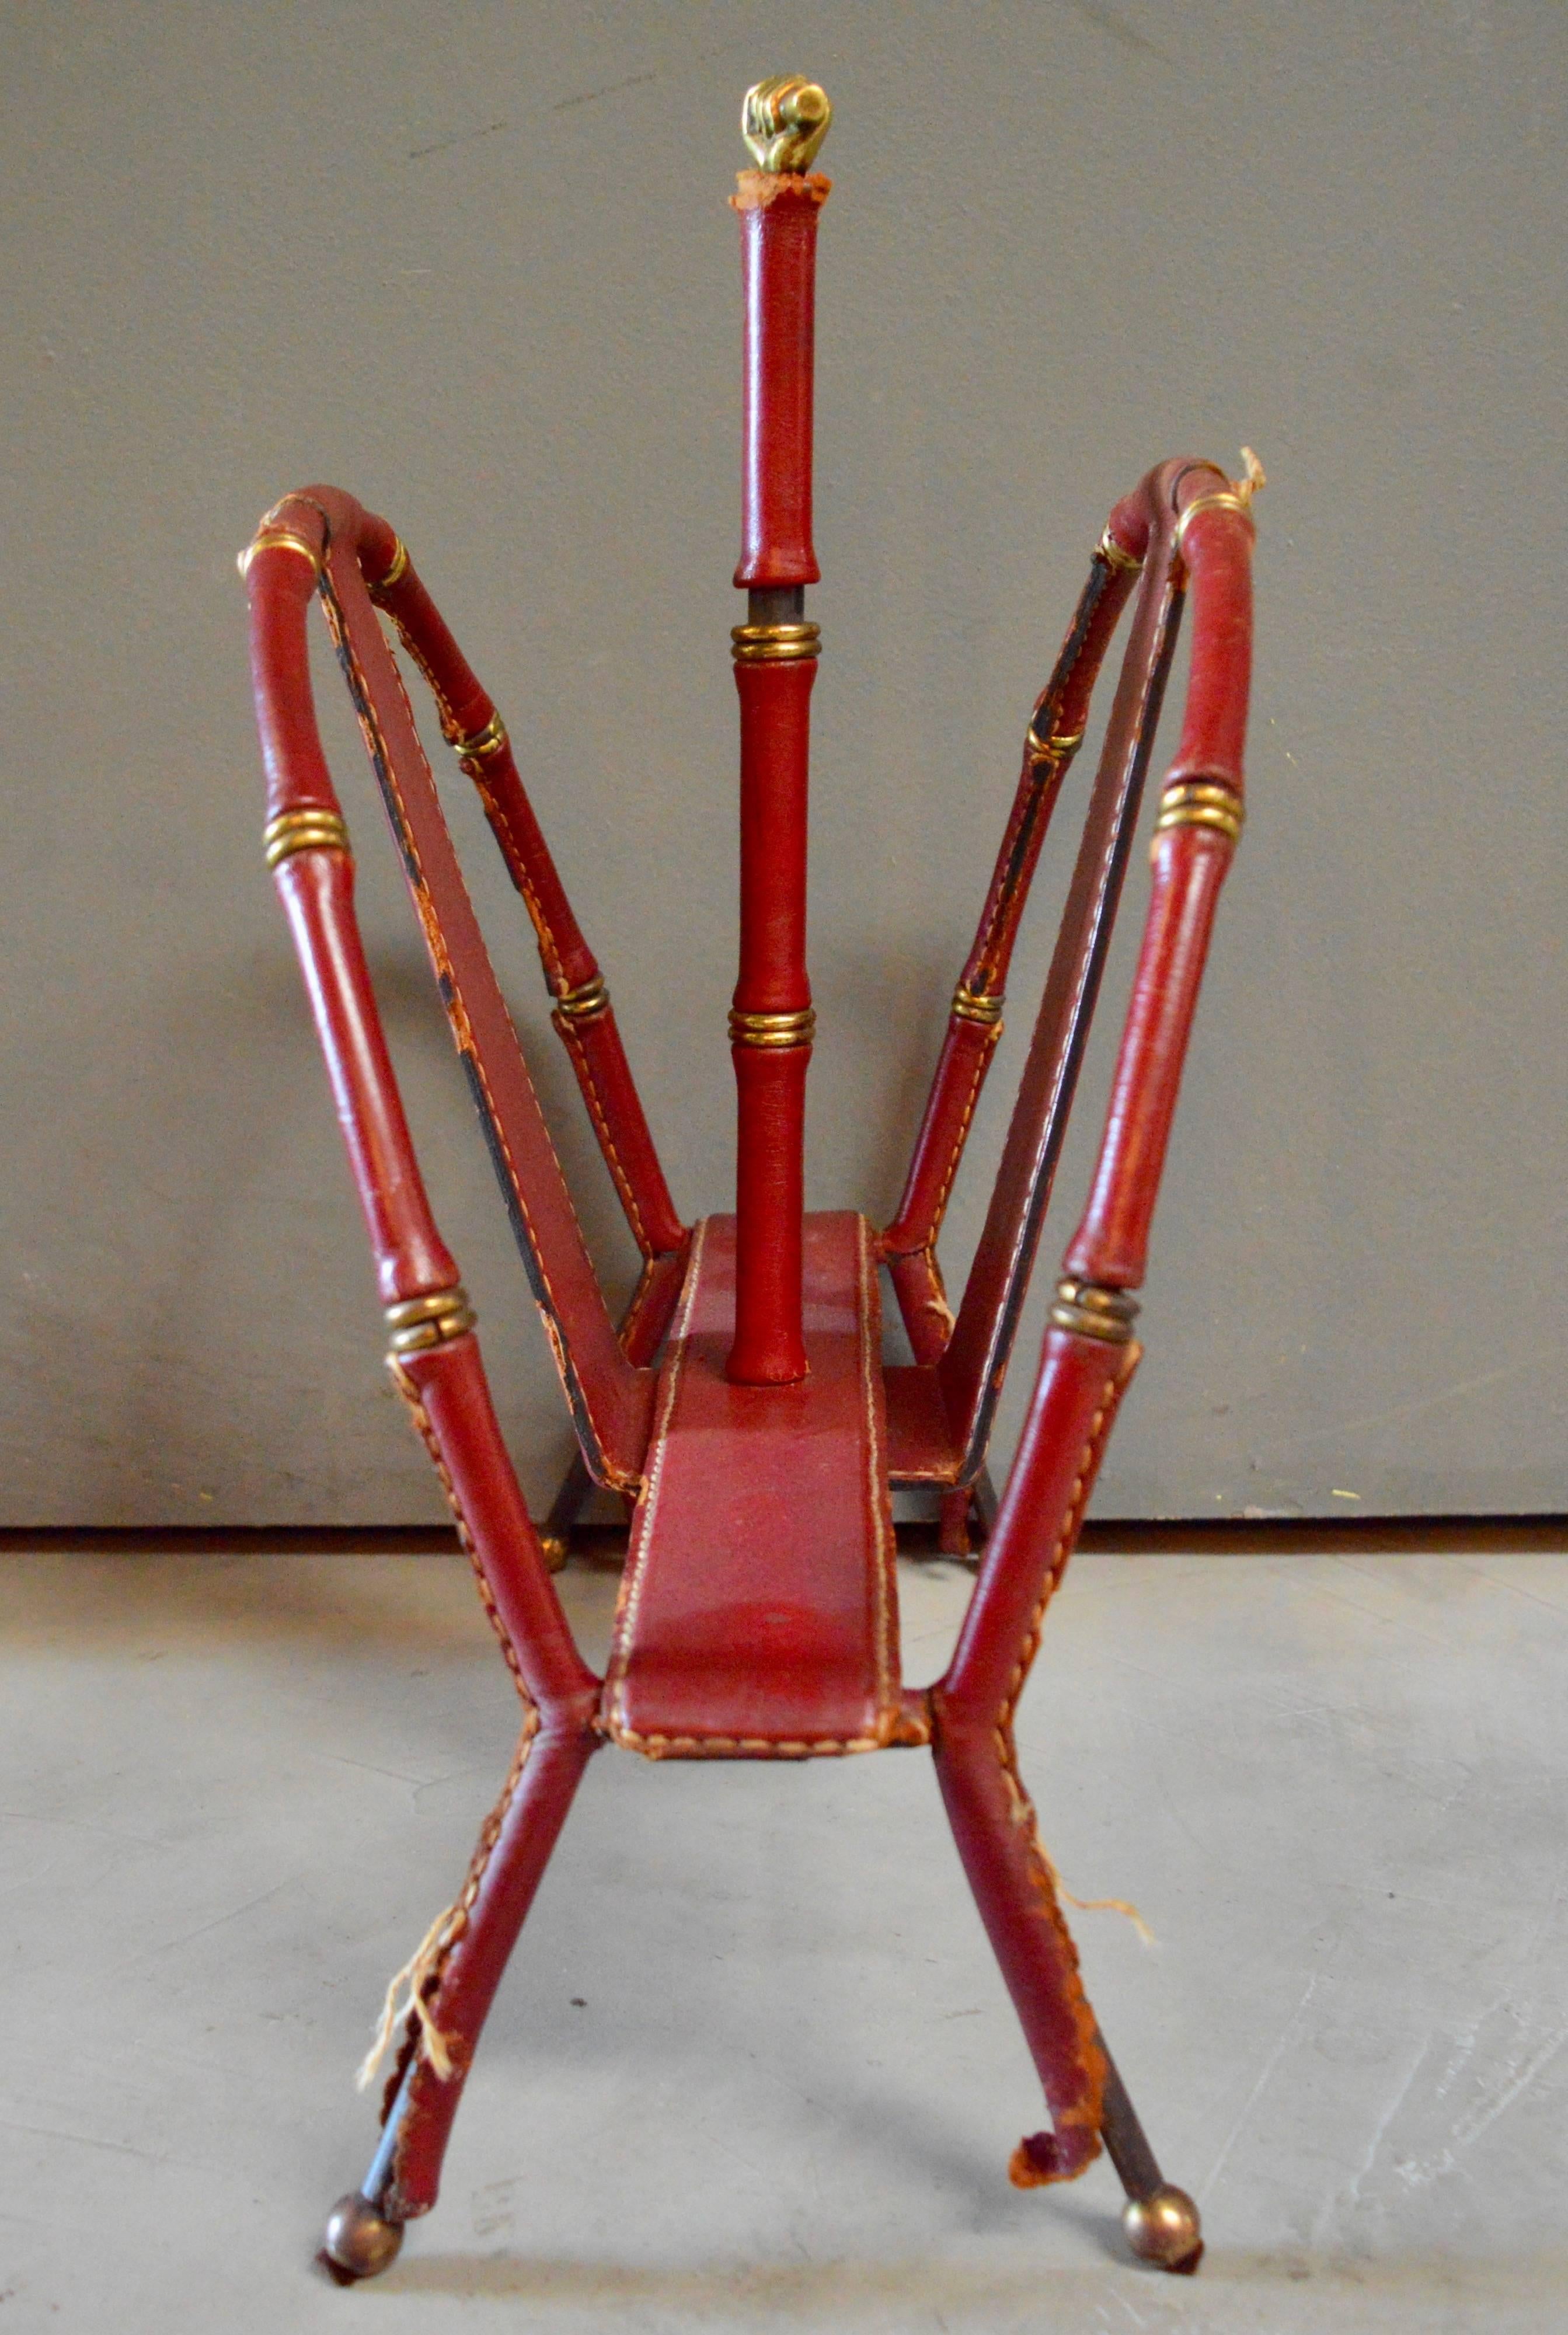 Handsome magazine rack by French designer Jacques Adnet. Red leather wrapped around iron frame, with brass ball feet, brass trim and brass clenched fist. Signature Adnet contrast stitching. Original condition. Unrestored. Great collectors piece of